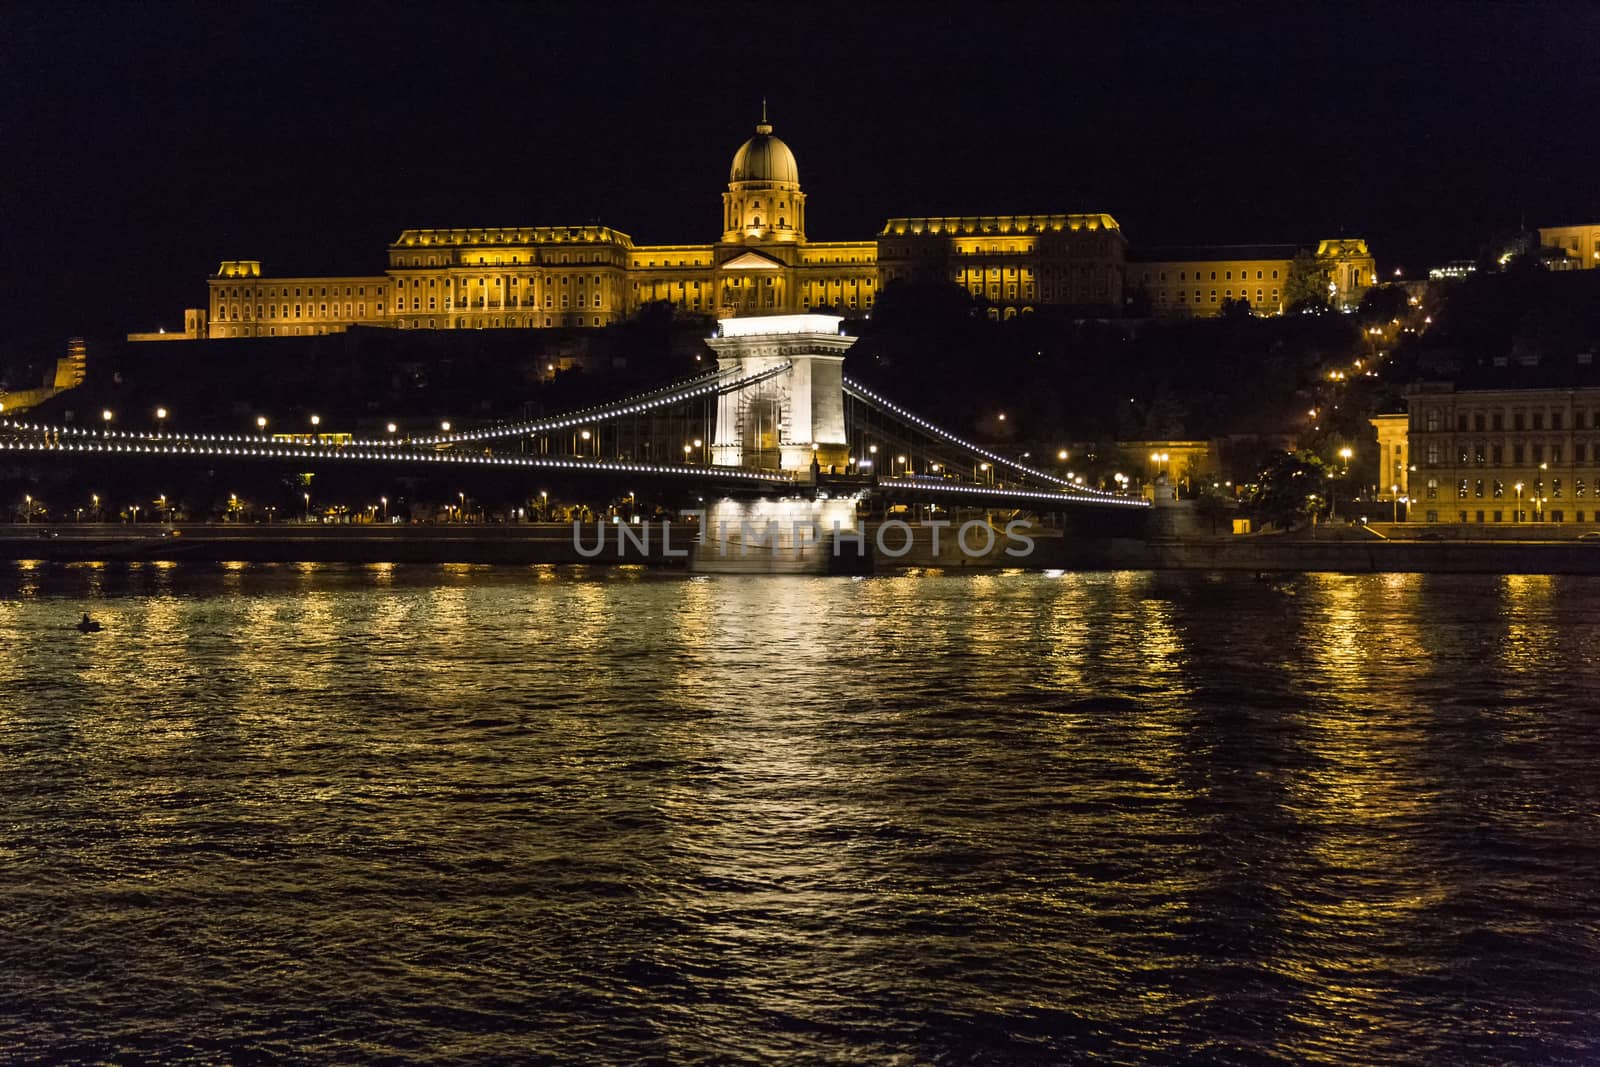 A  view of the Danube river in Budapest in Hungary